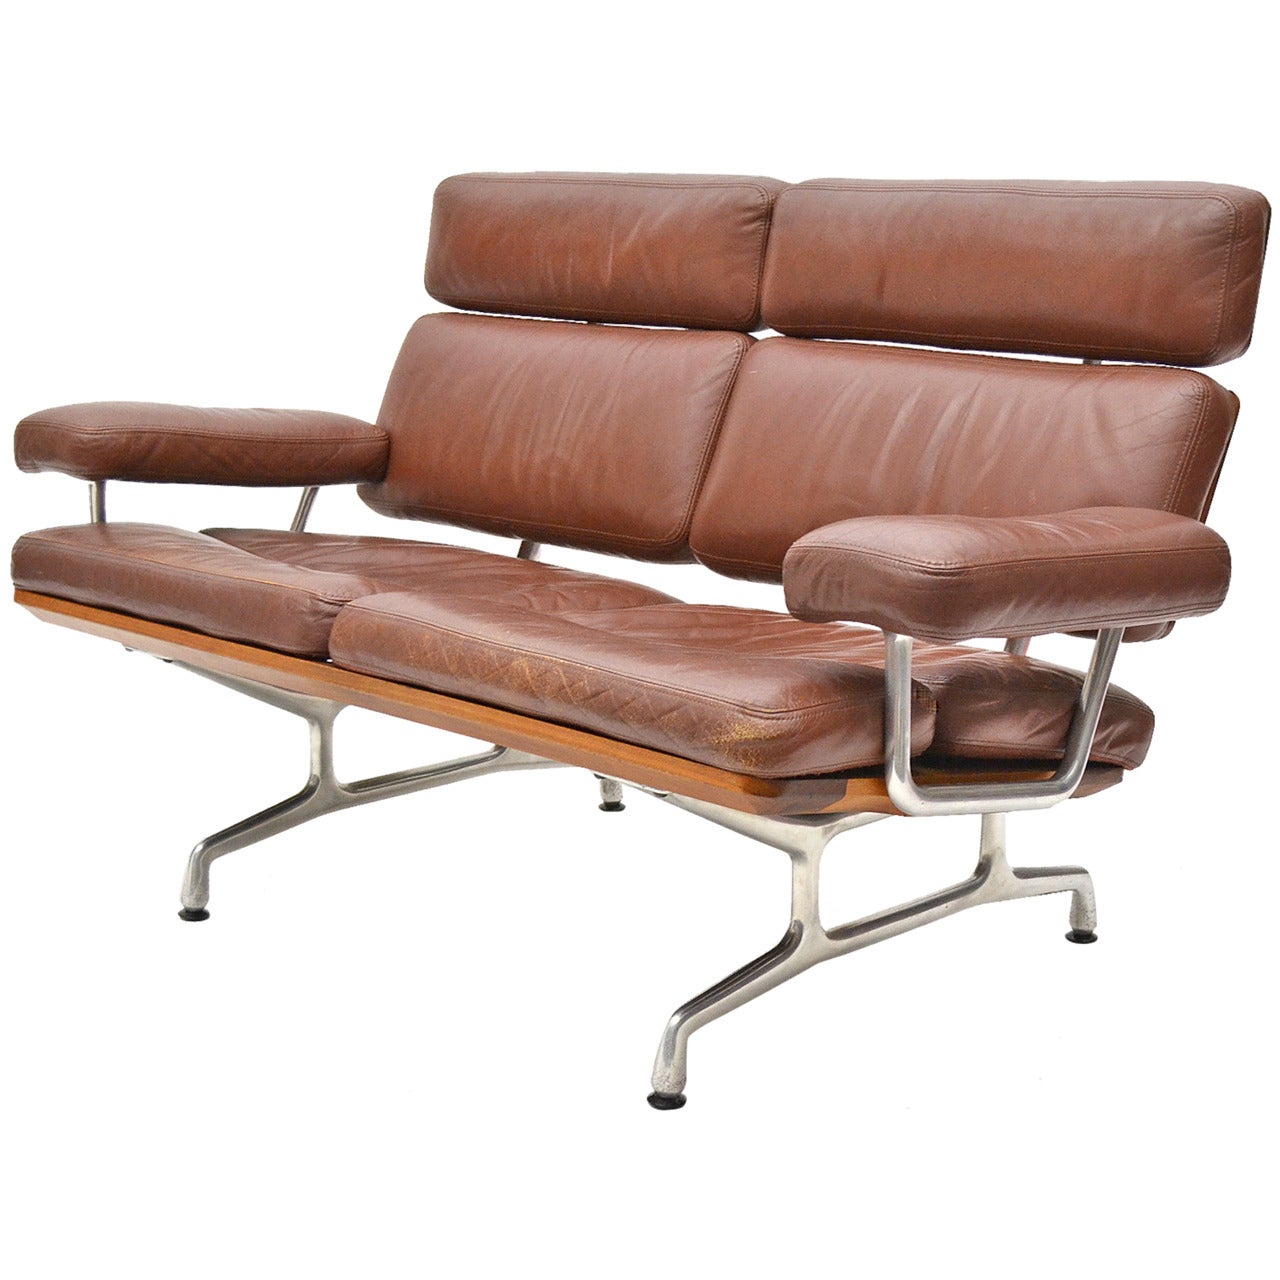 Eames Teak and Leather Sofa by Herman Miller